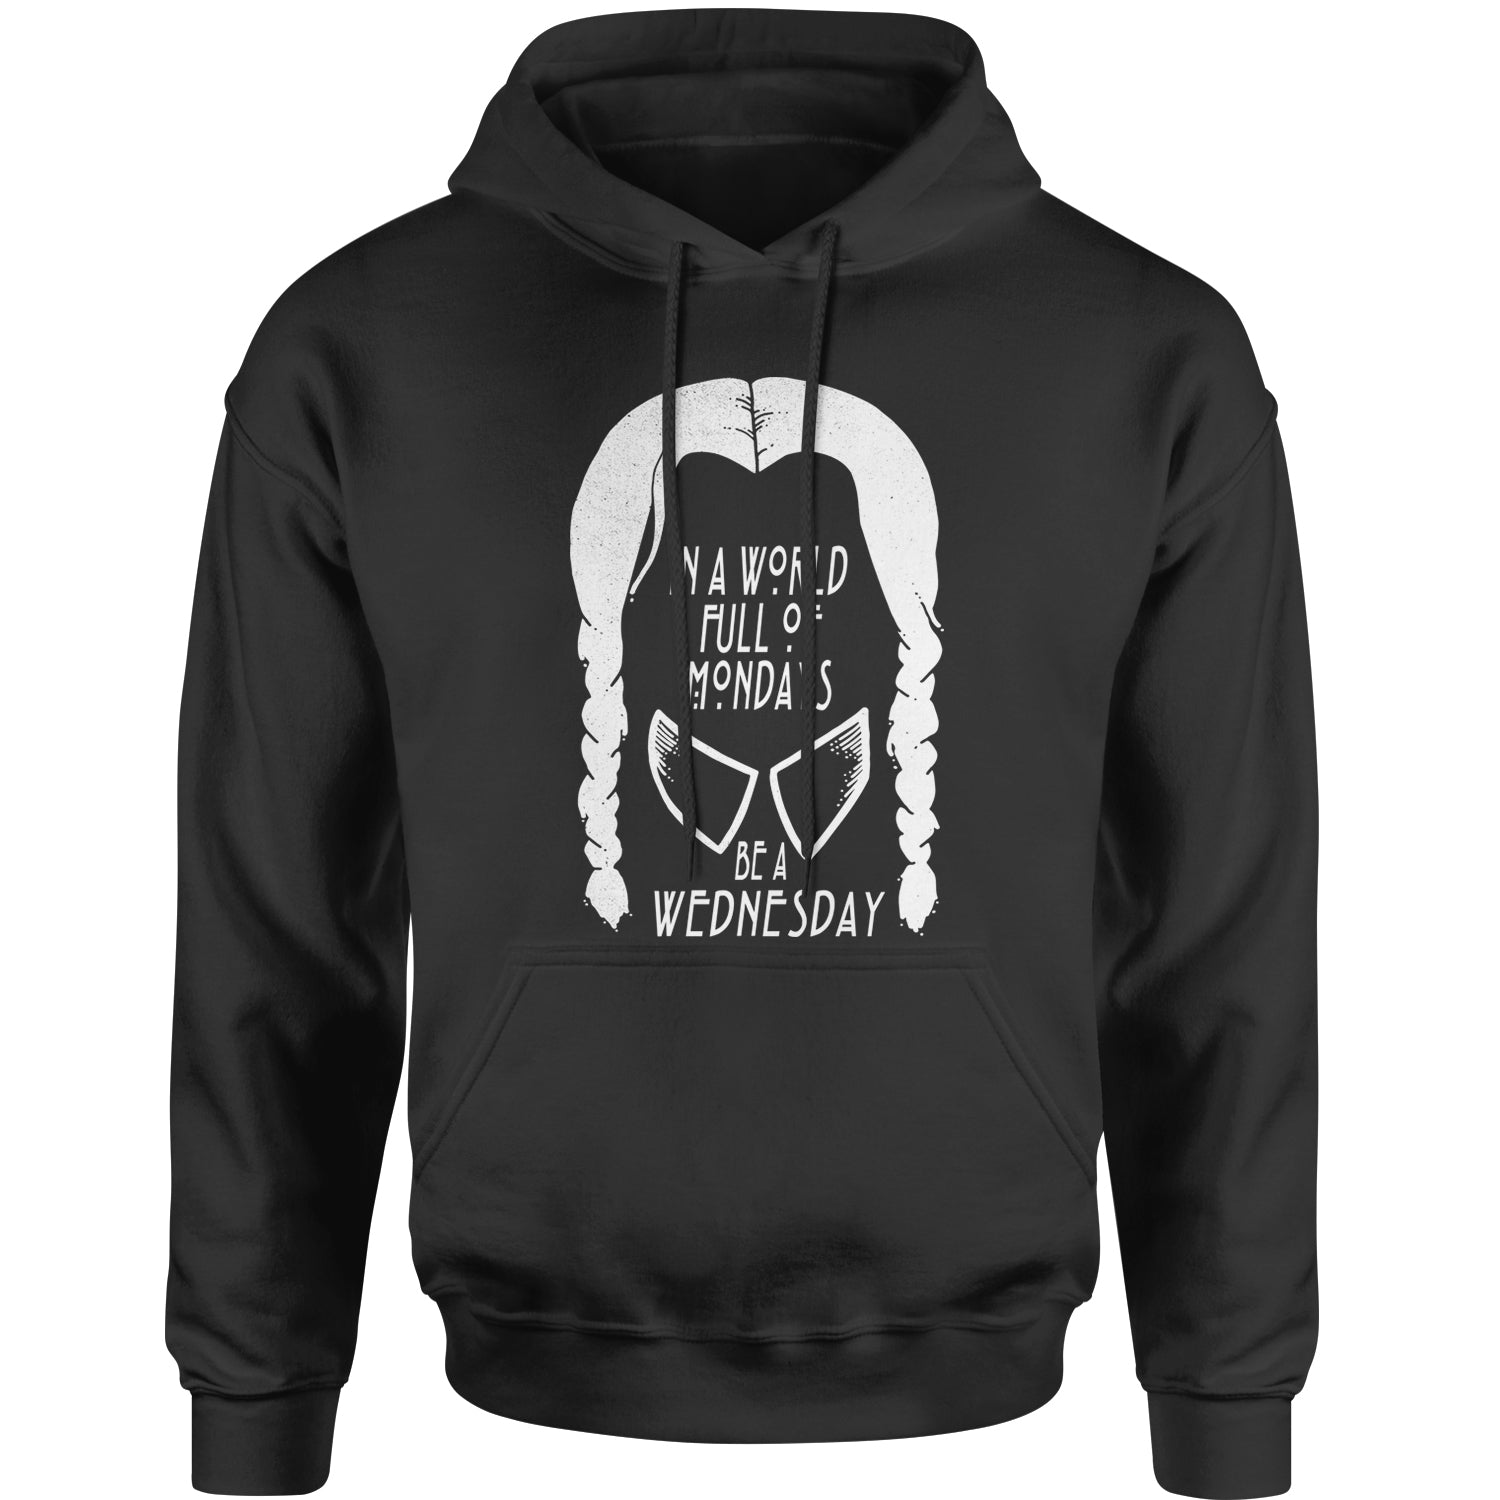 In A World Full Of Mondays, Be A Wednesday Adult Hoodie Sweatshirt academy, jericho, more, never, nevermore, vermont, Wednesday by Expression Tees